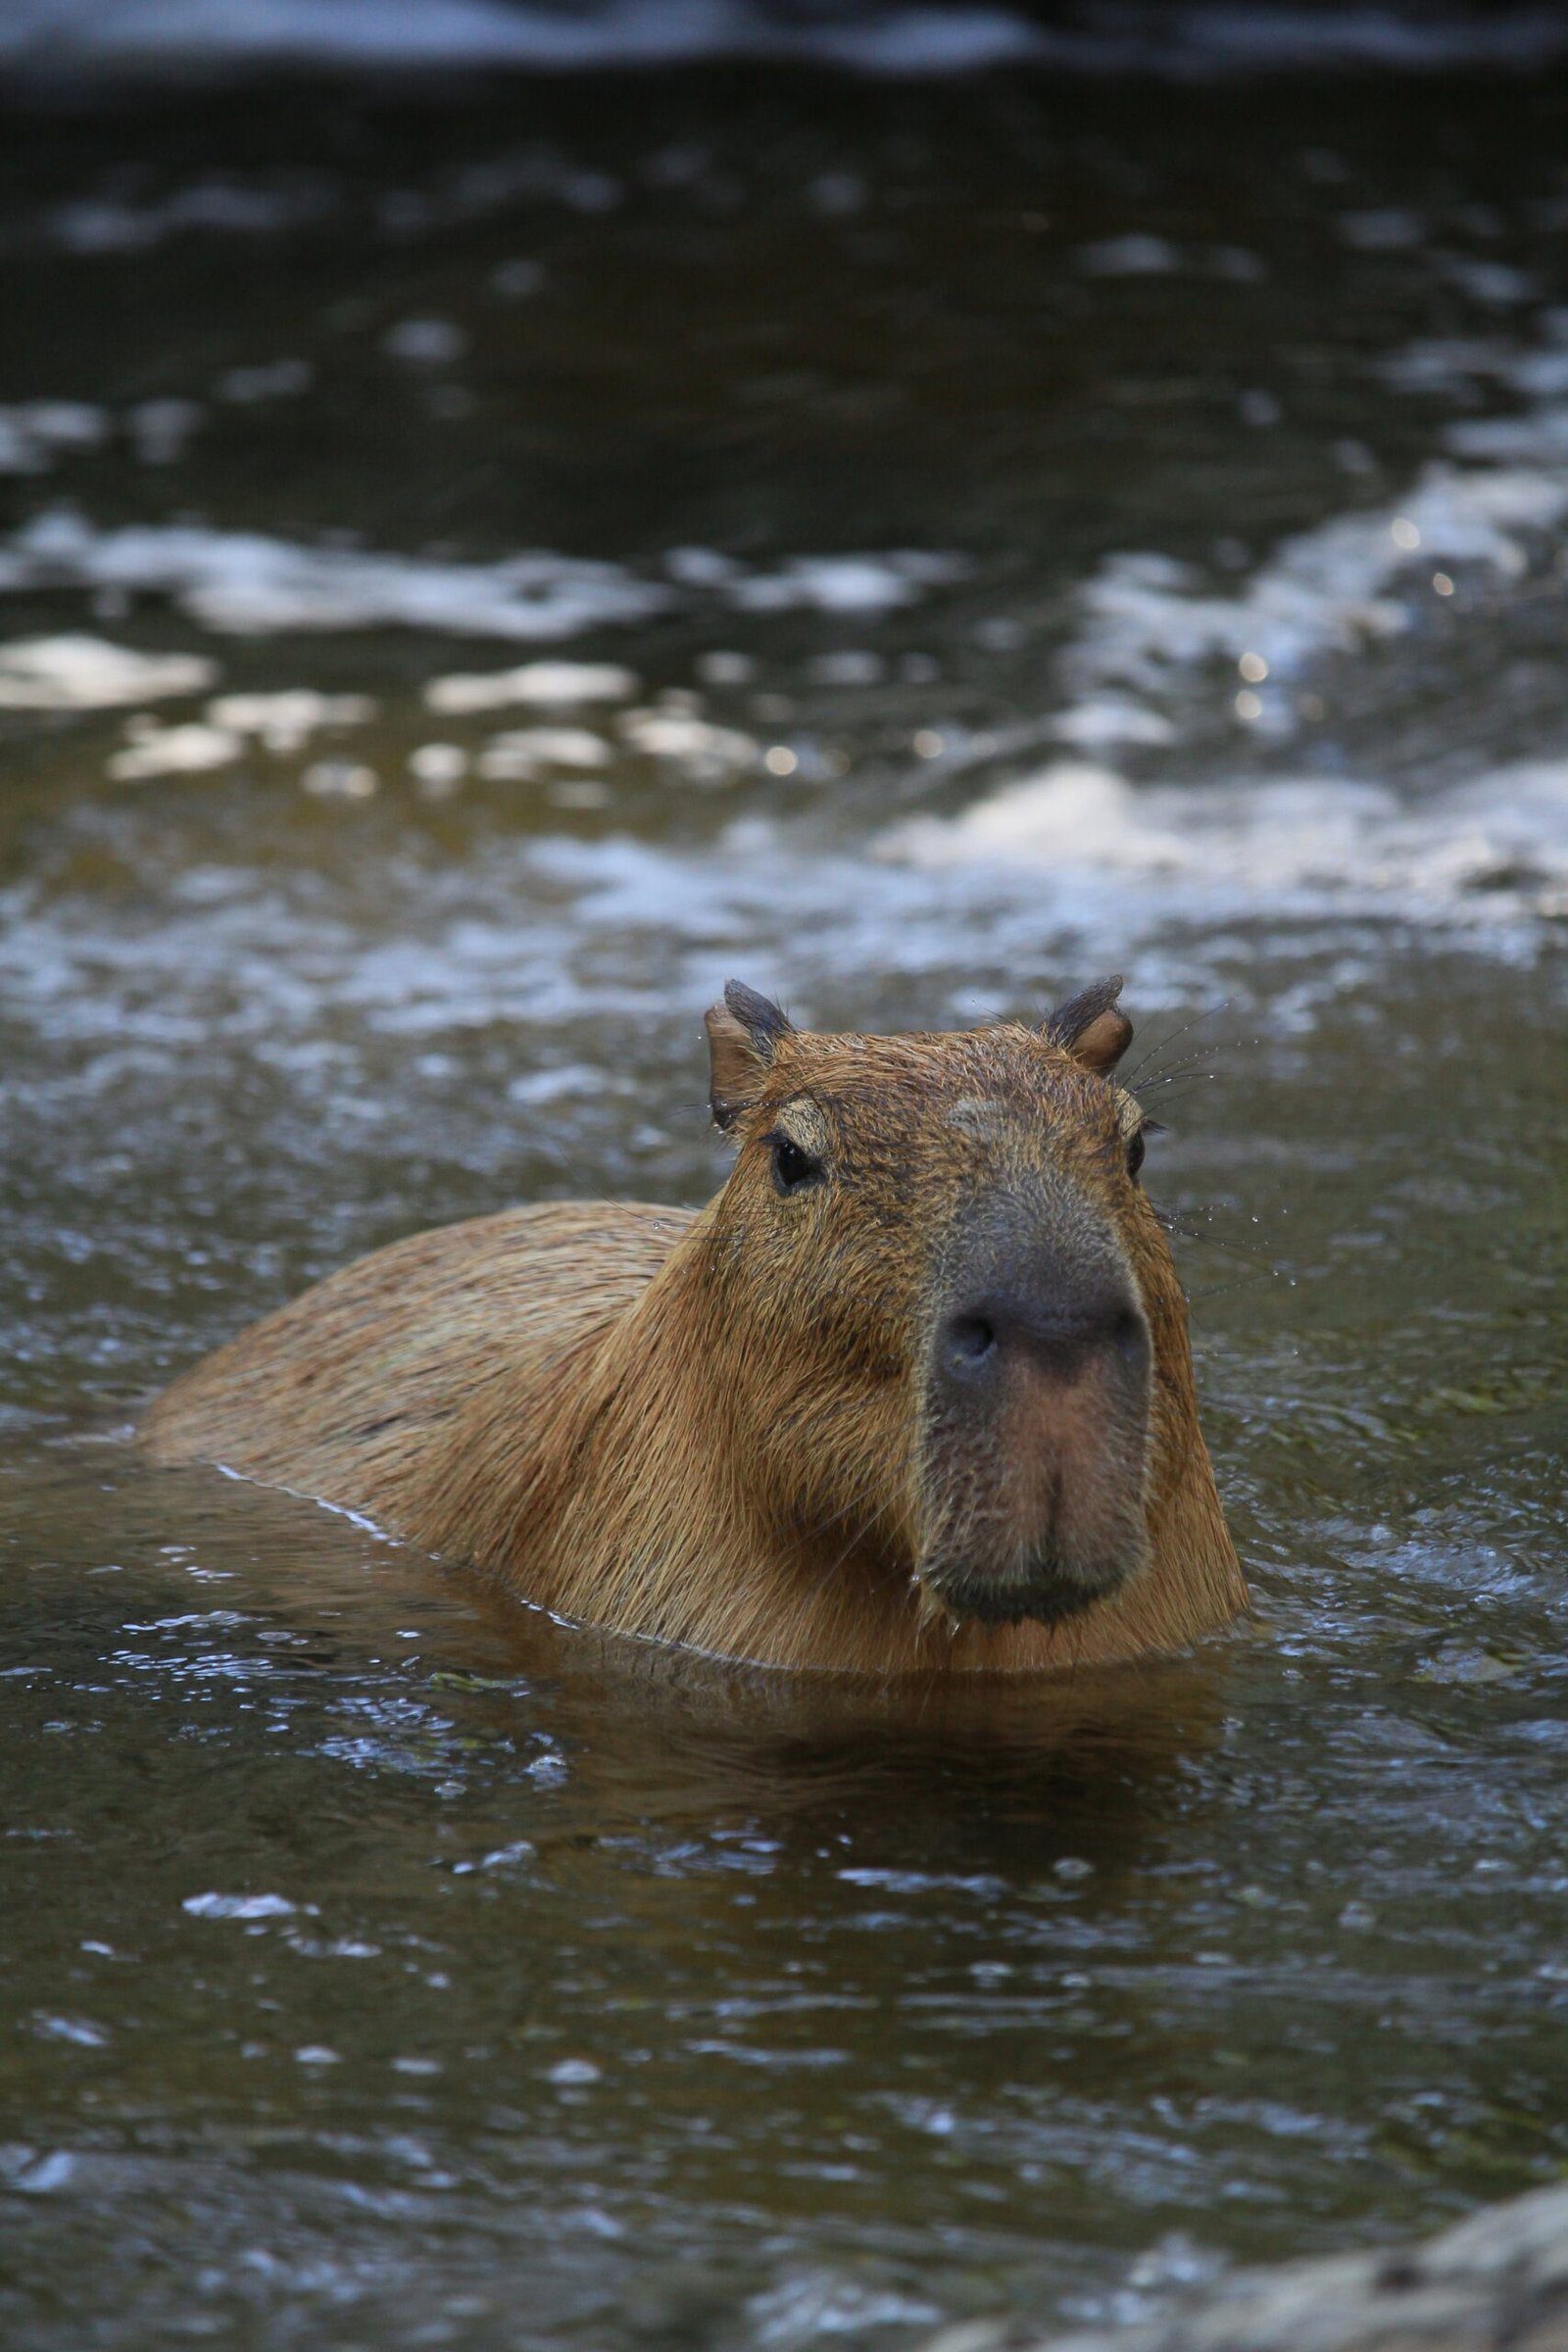 Is it legal to keep a capybara as a pet in the United States?